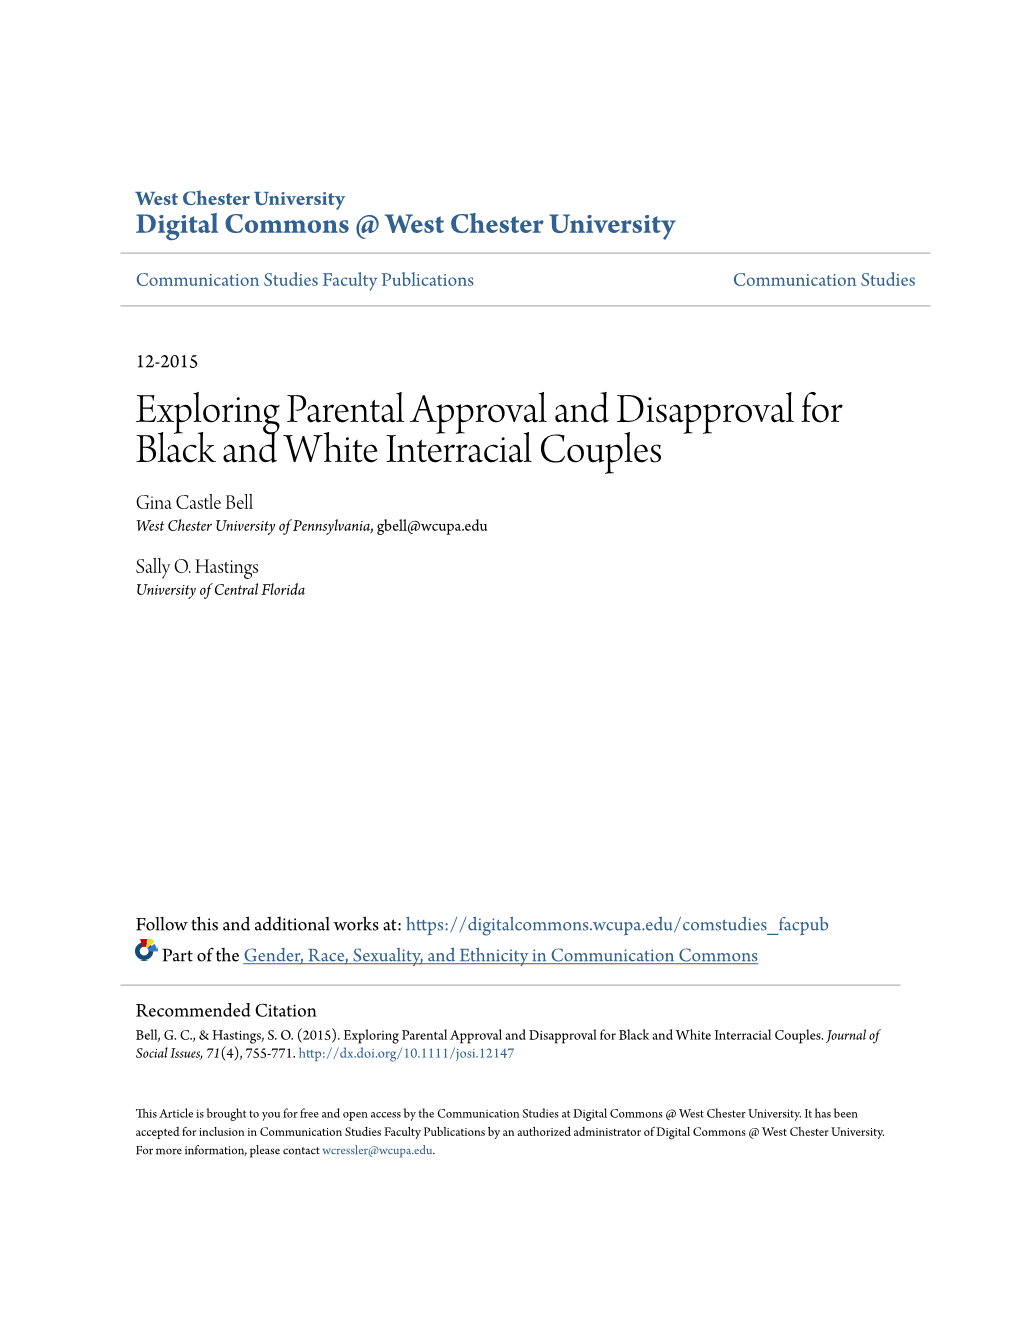 Exploring Parental Approval and Disapproval for Black and White Interracial Couples Gina Castle Bell West Chester University of Pennsylvania, Gbell@Wcupa.Edu